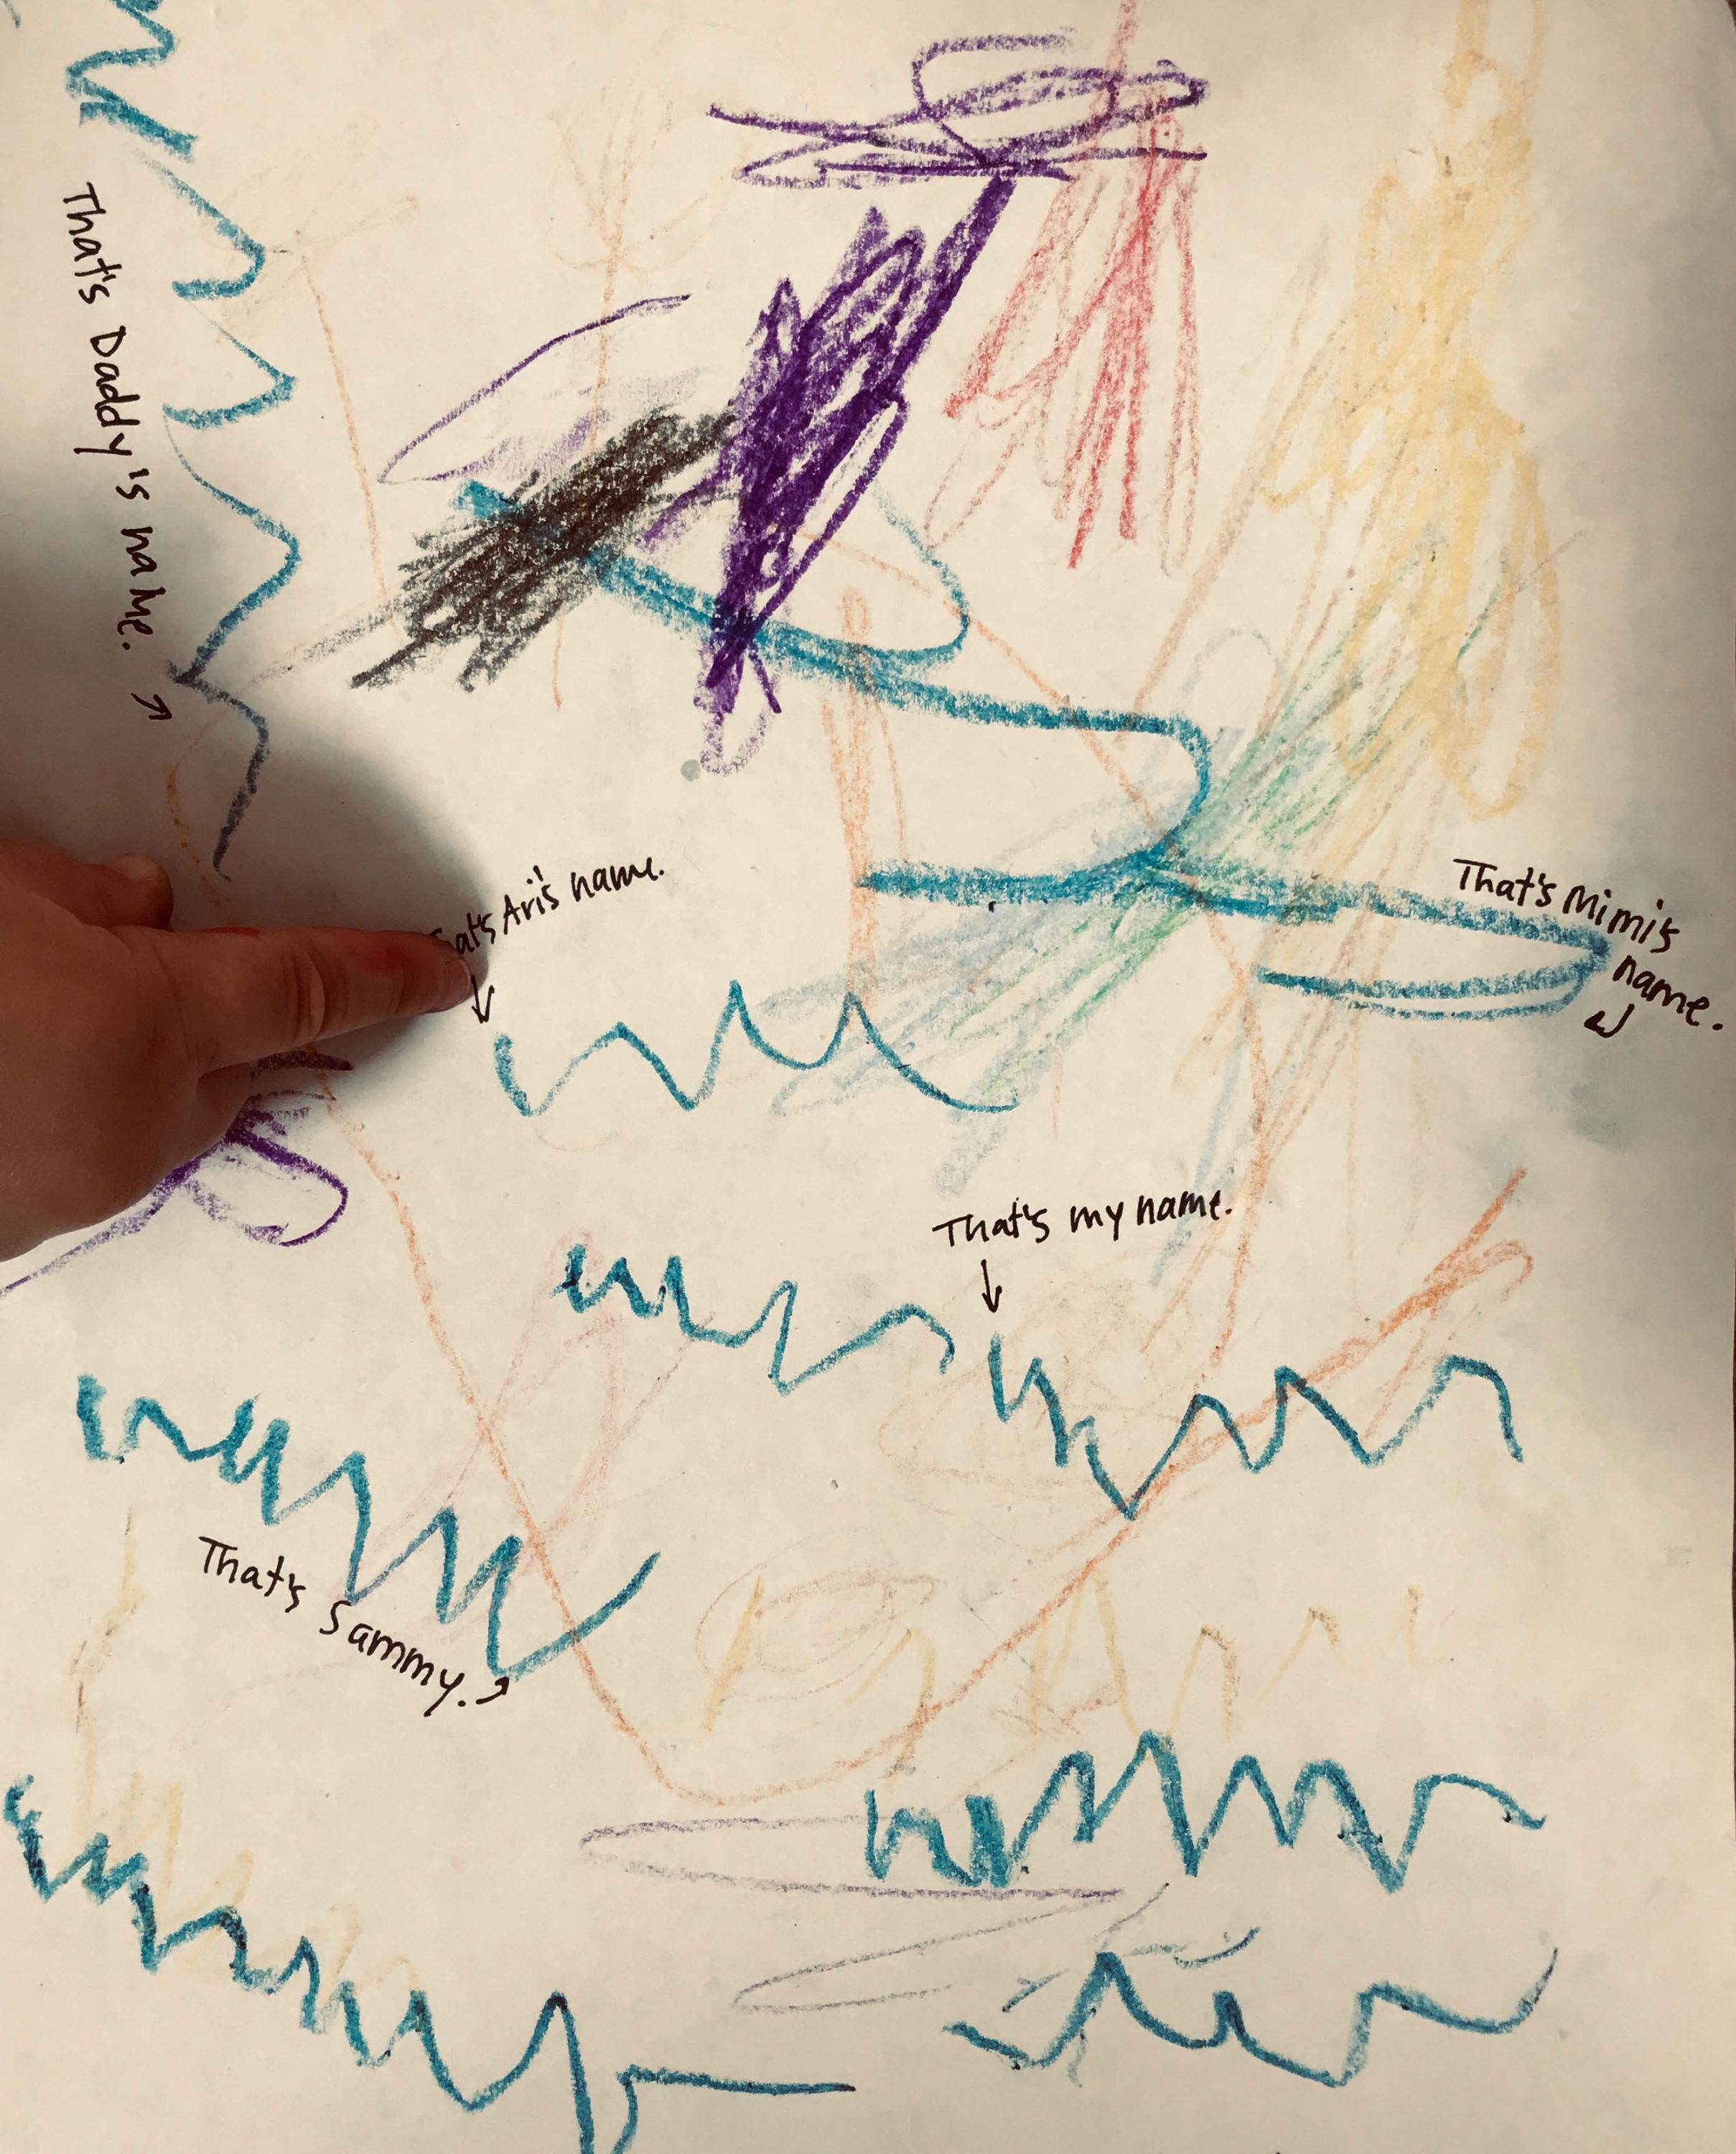 Teachers add text to a child's drawings.